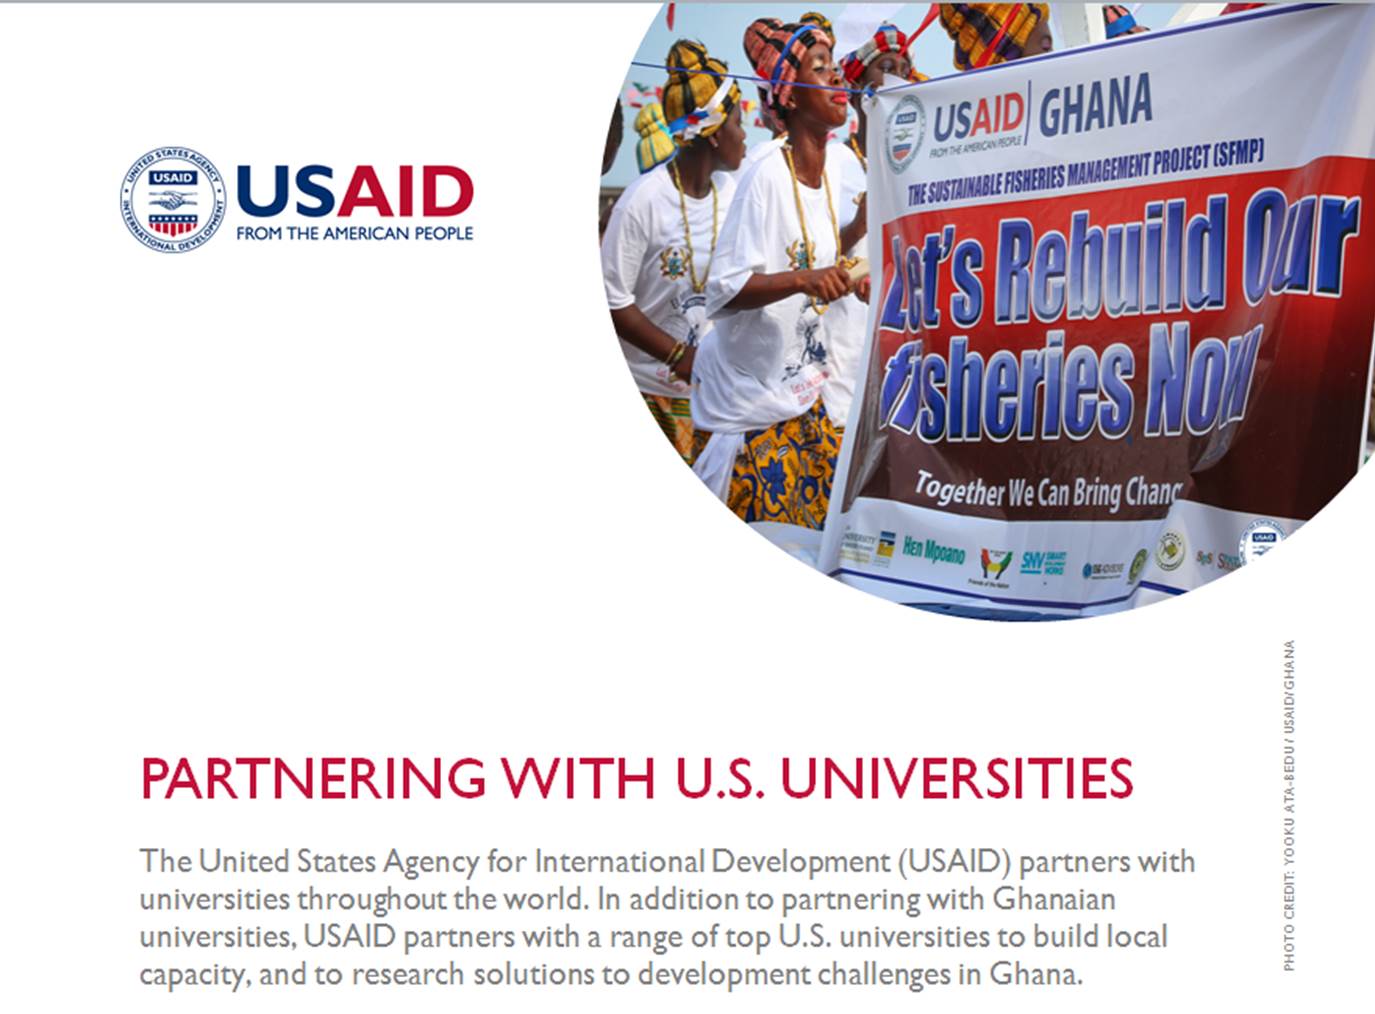 The USAID partners with universities throughout the world.